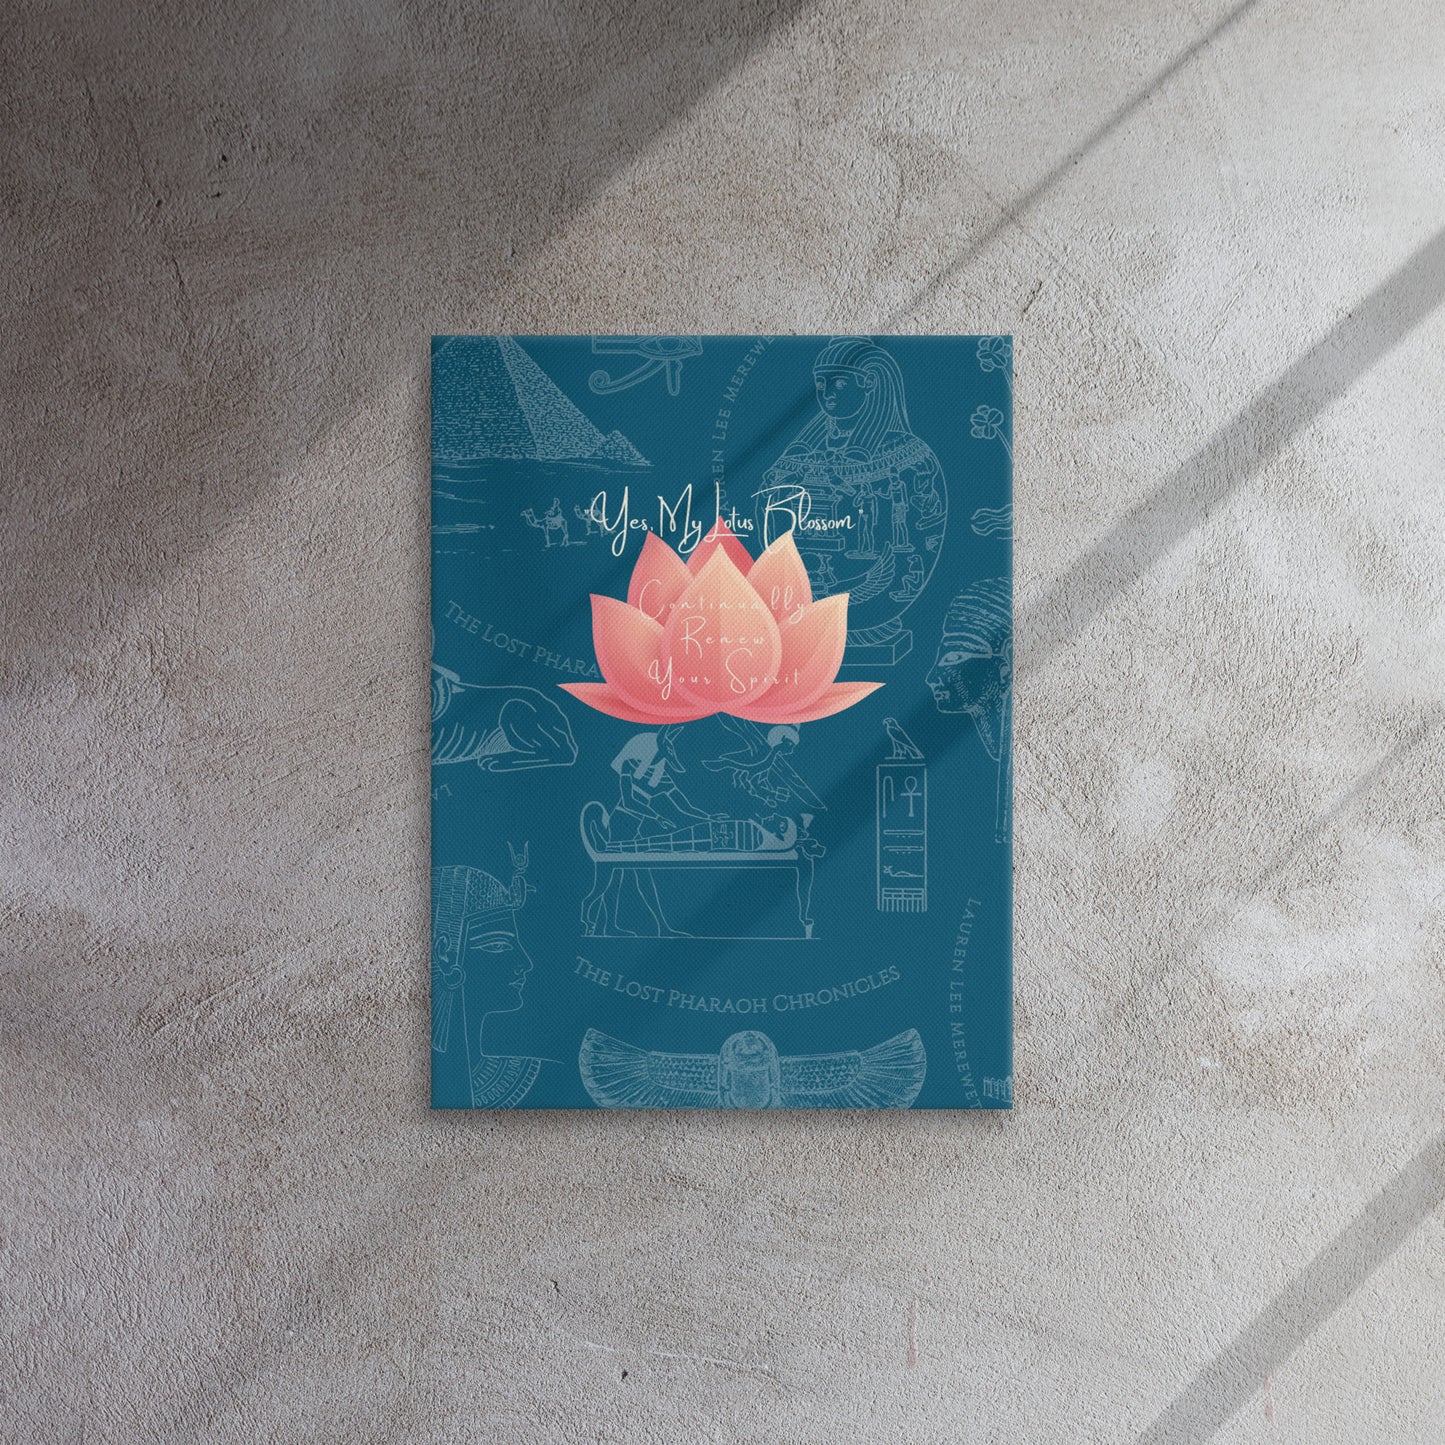 "Yes My Lotus Blossom Renew Your Spirit" Thin canvas